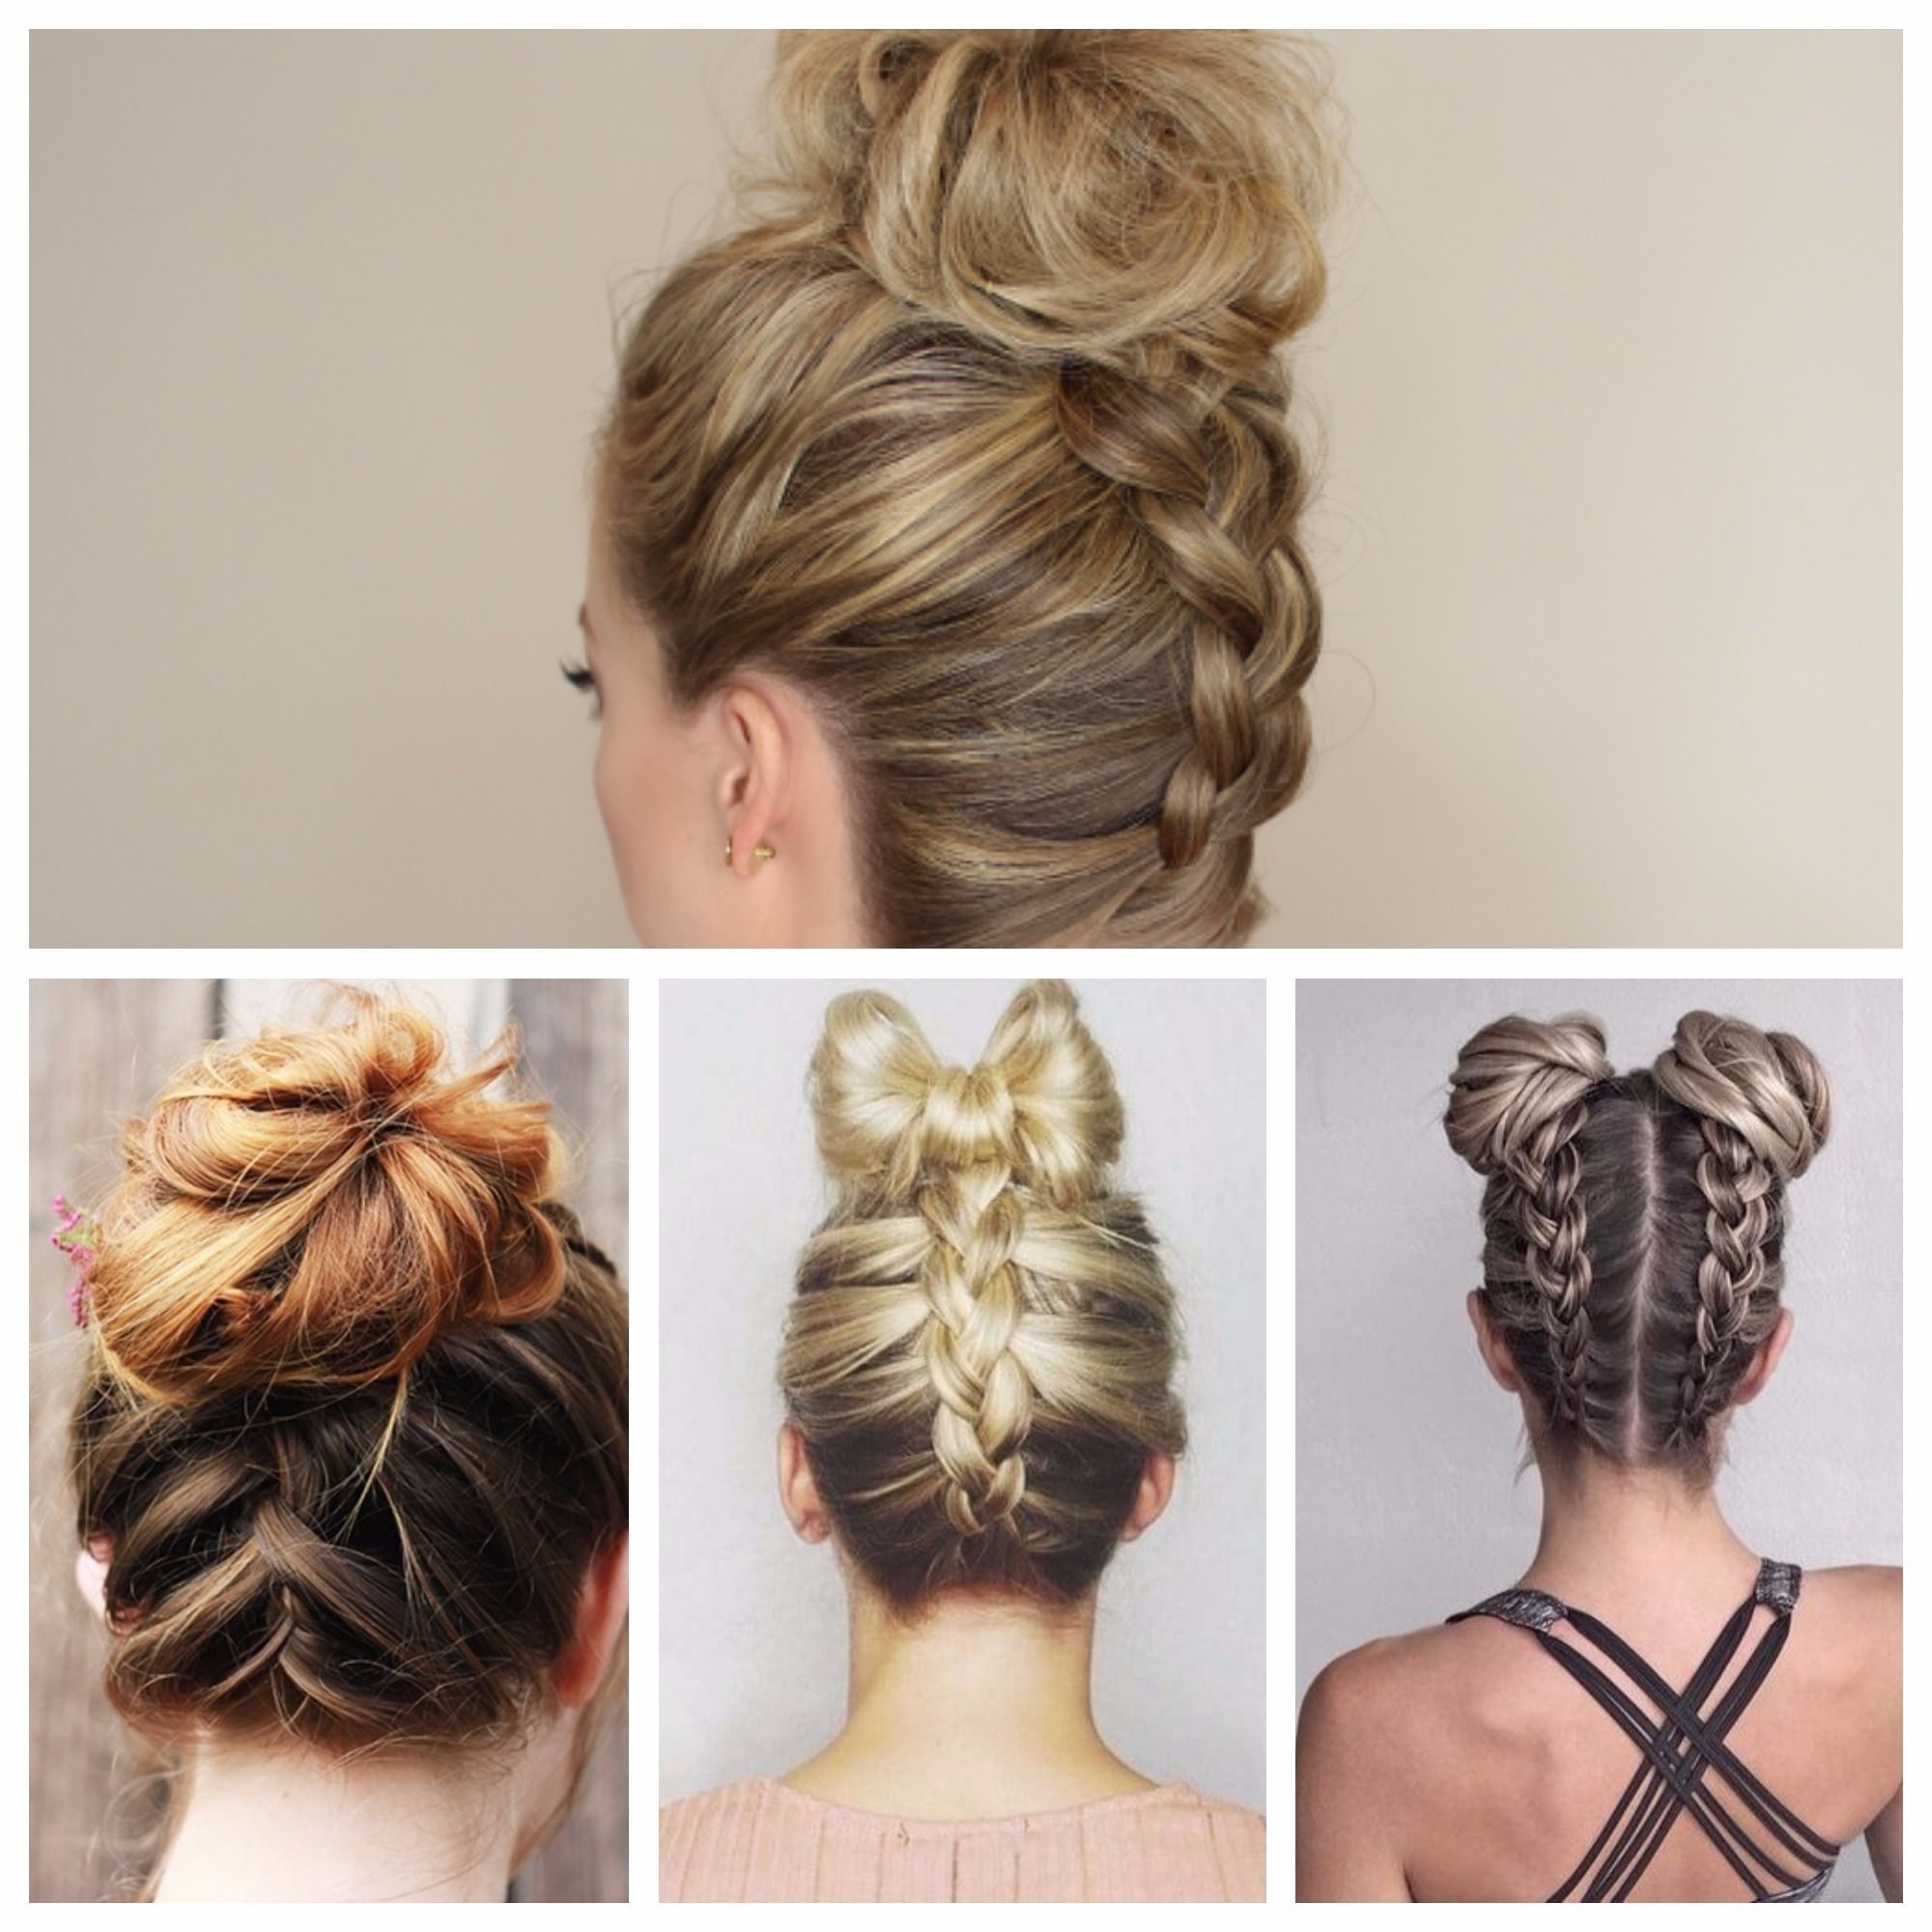 Collection Of Solutions Bun And Braid Hairstyles Marvelous Hair Bun Intended For Trendy Braided Hairstyles With Buns (View 8 of 15)